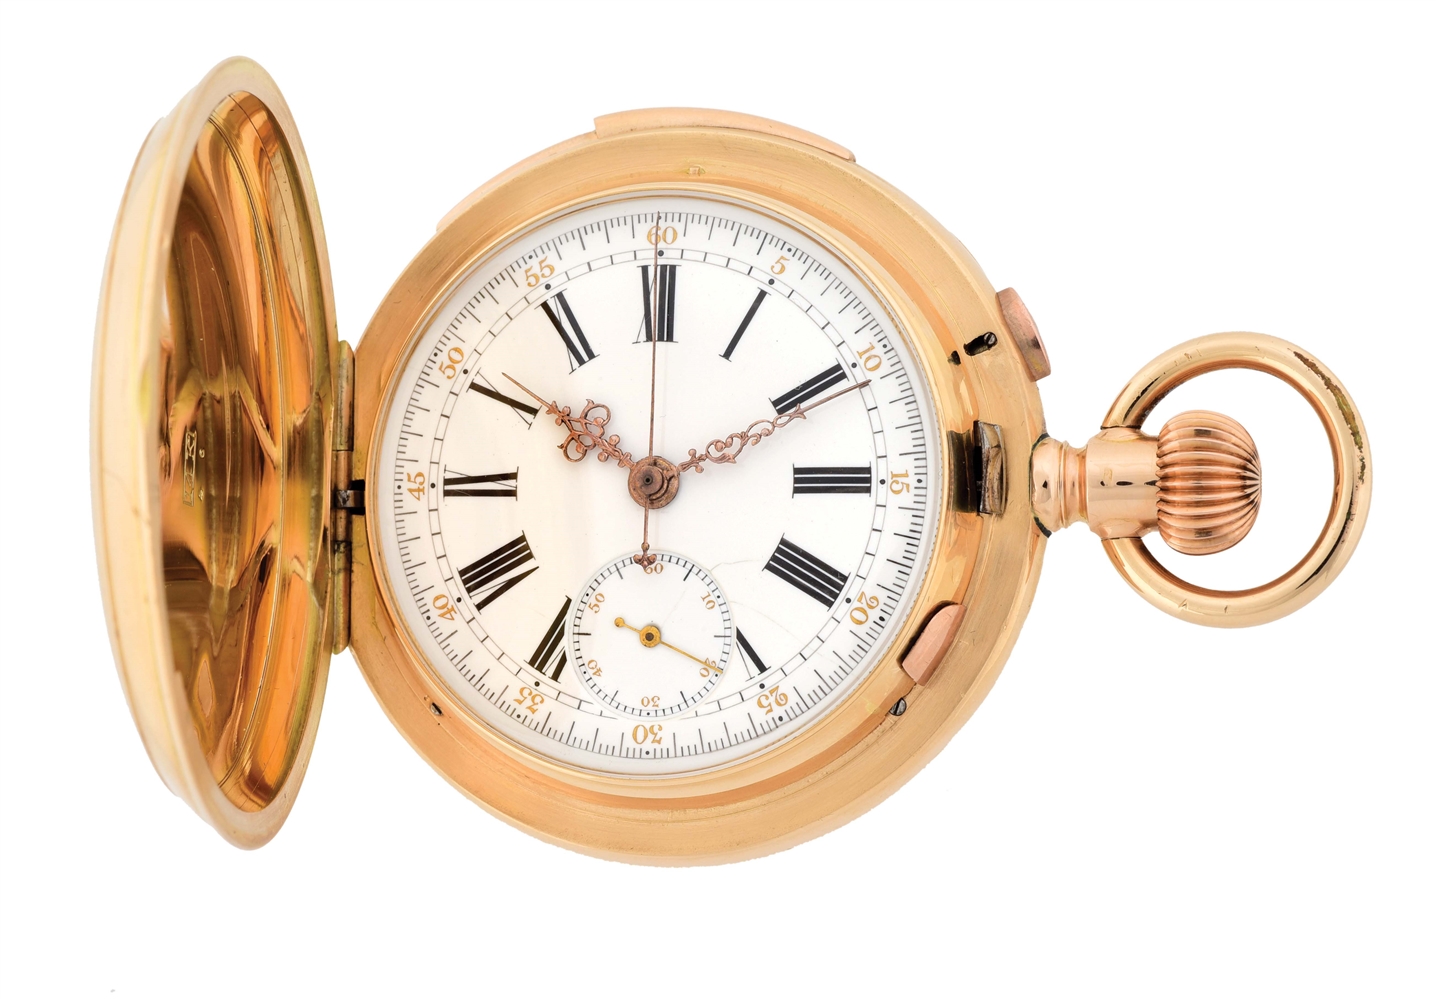 14K GOLD A. LUGRIN, NYC, MINUTE REPEATING CHRONOGRAPH H/C POCKET WATCH.